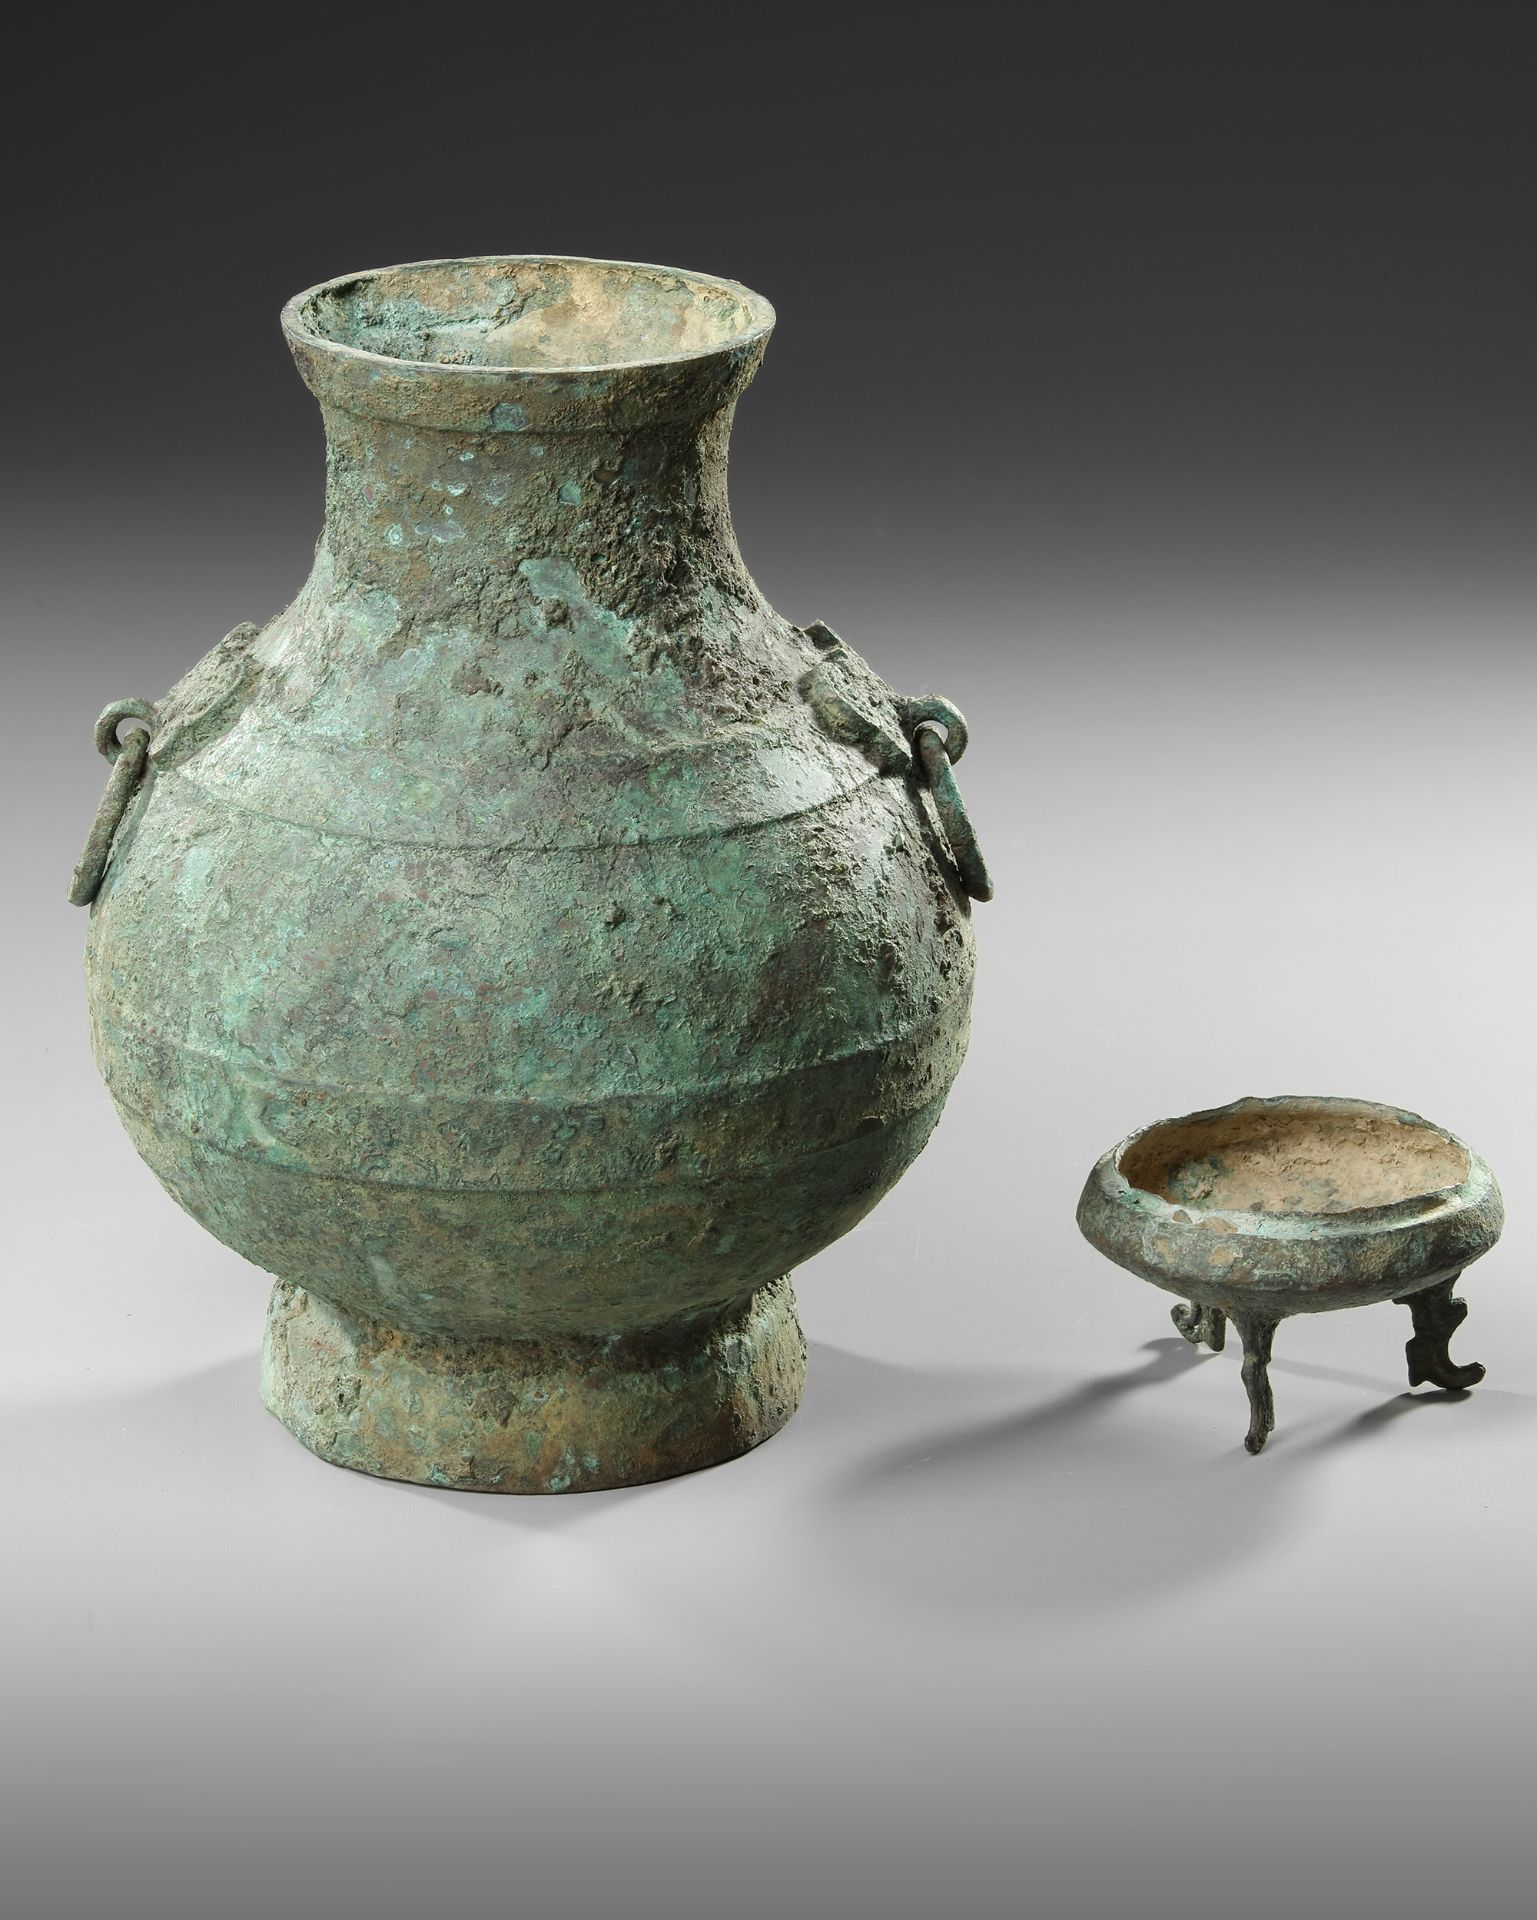 A CHINESE BRONZE RITUAL HU VASE, HAN DYNASTY (206 BC-220 AD) OR LATER - Image 4 of 5